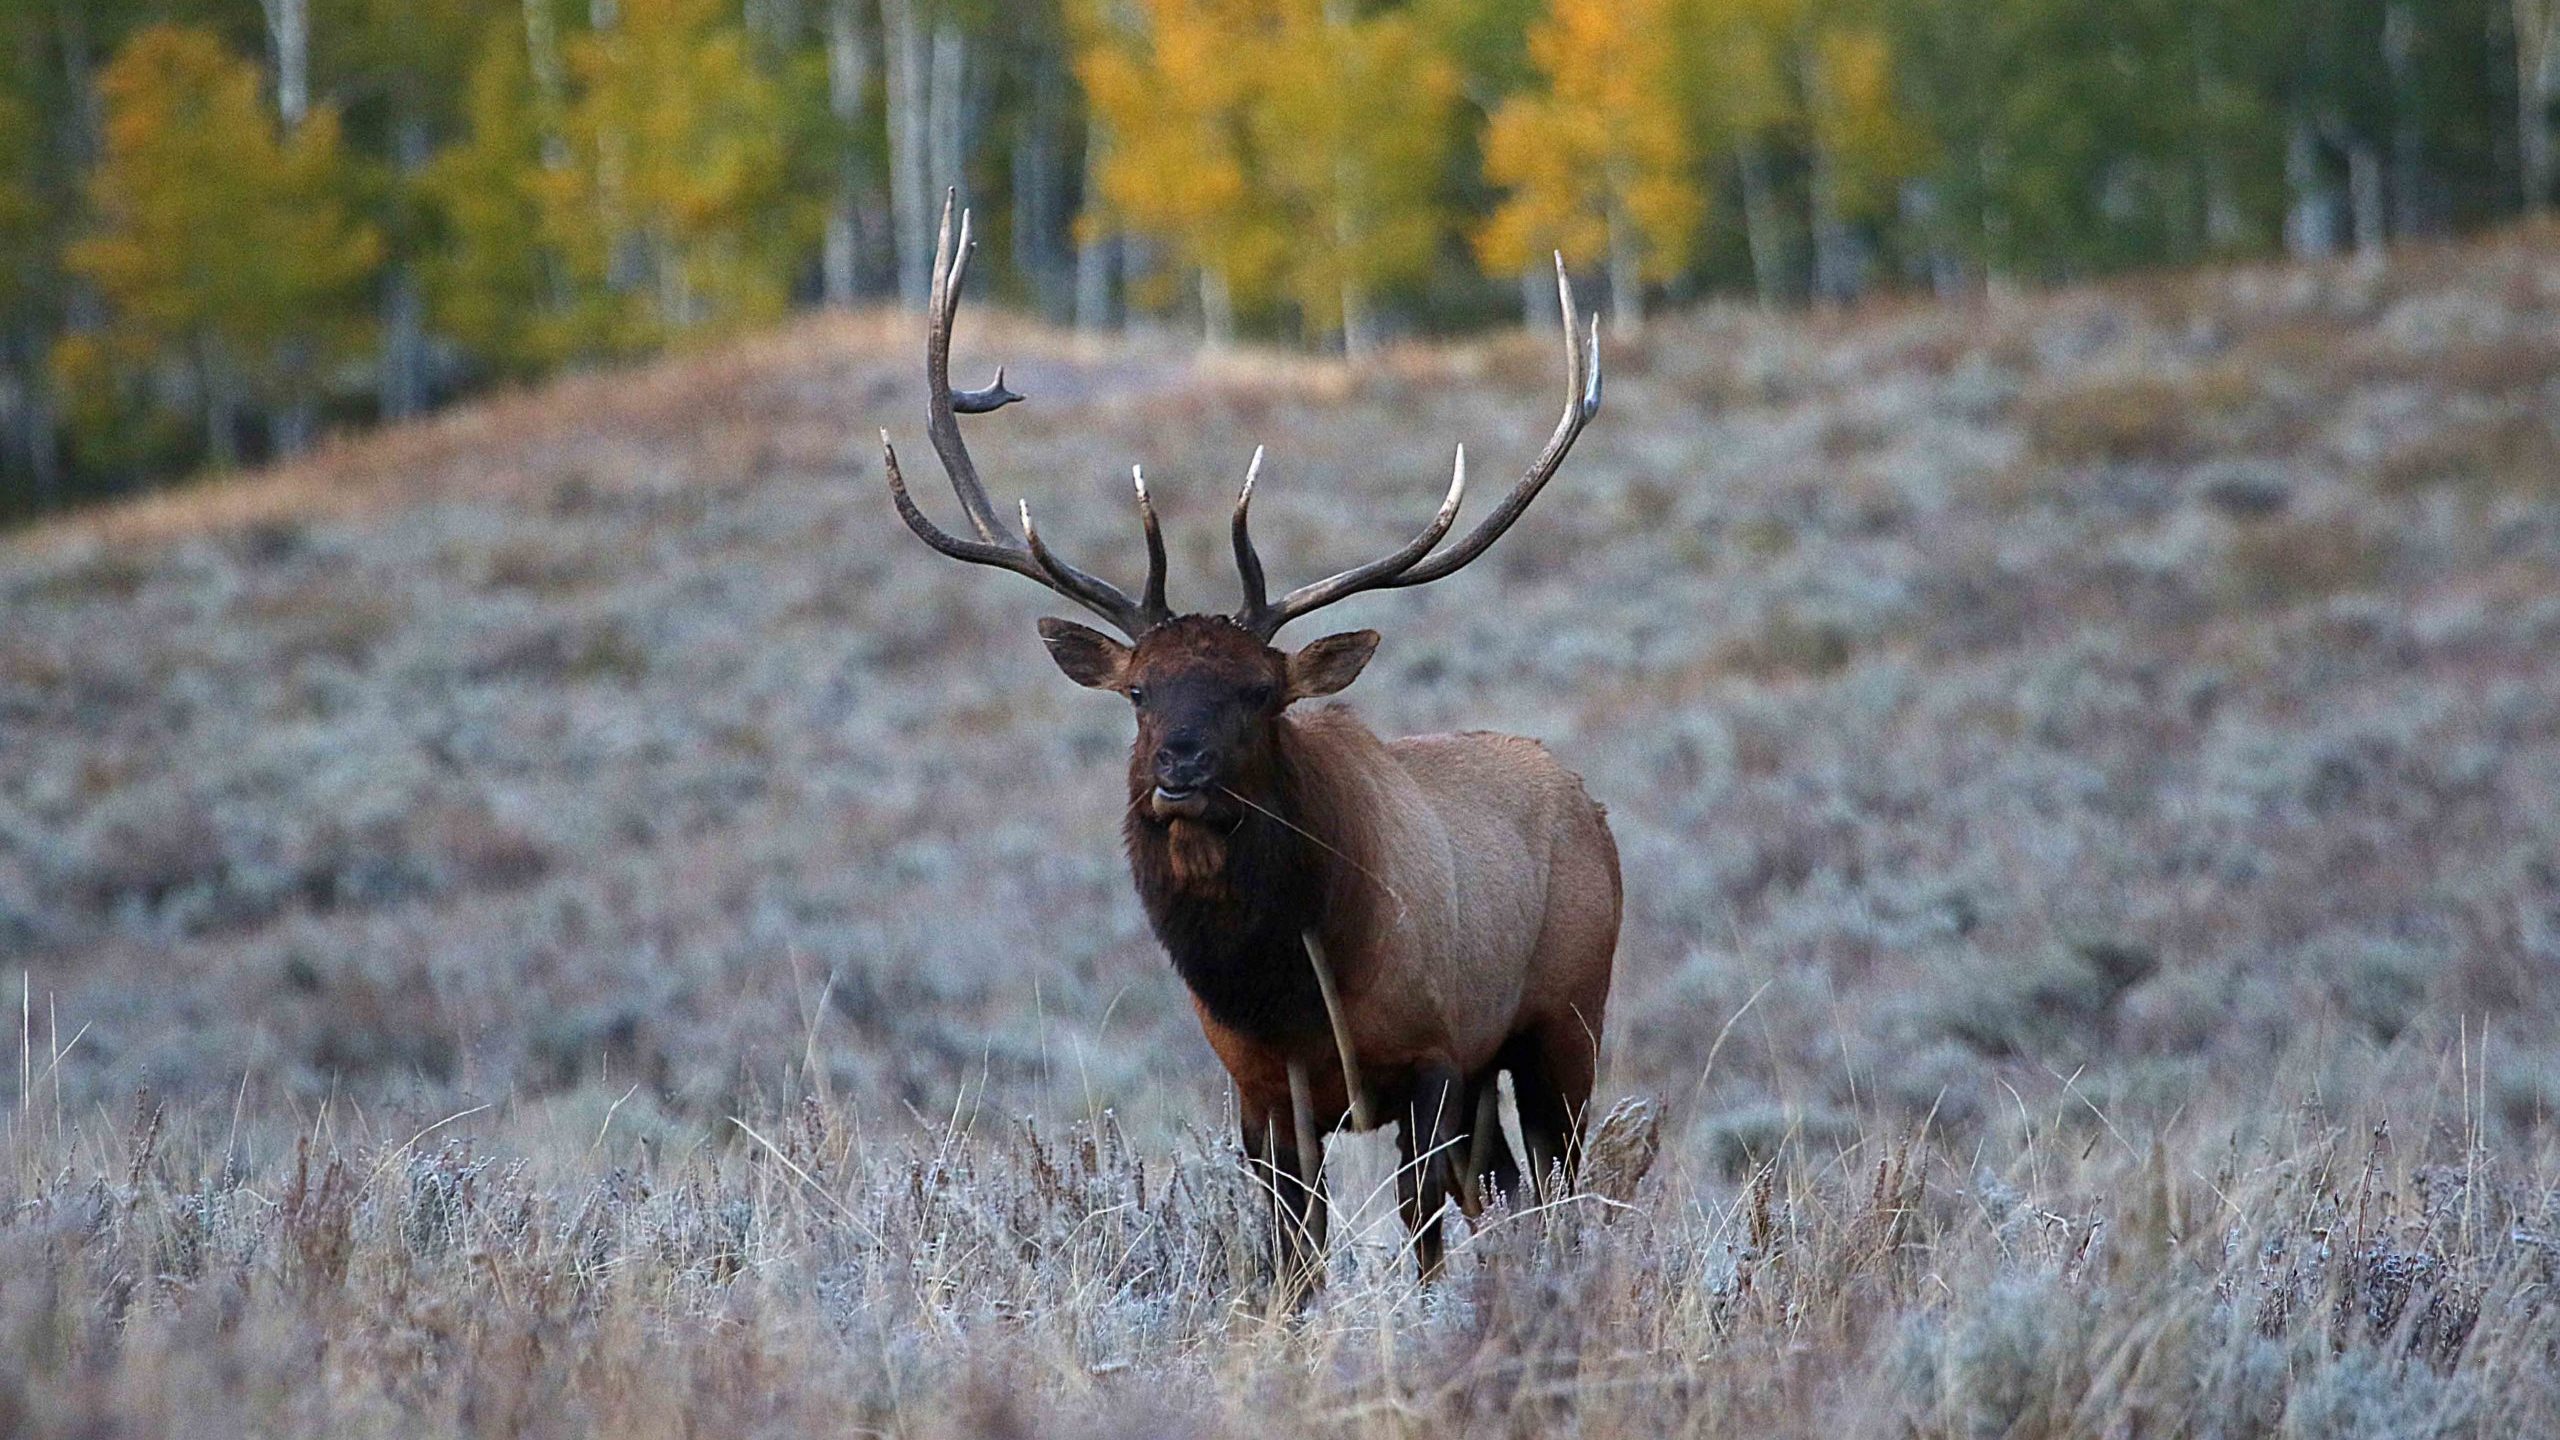 There could be some changes coming to elk hunting in the state....